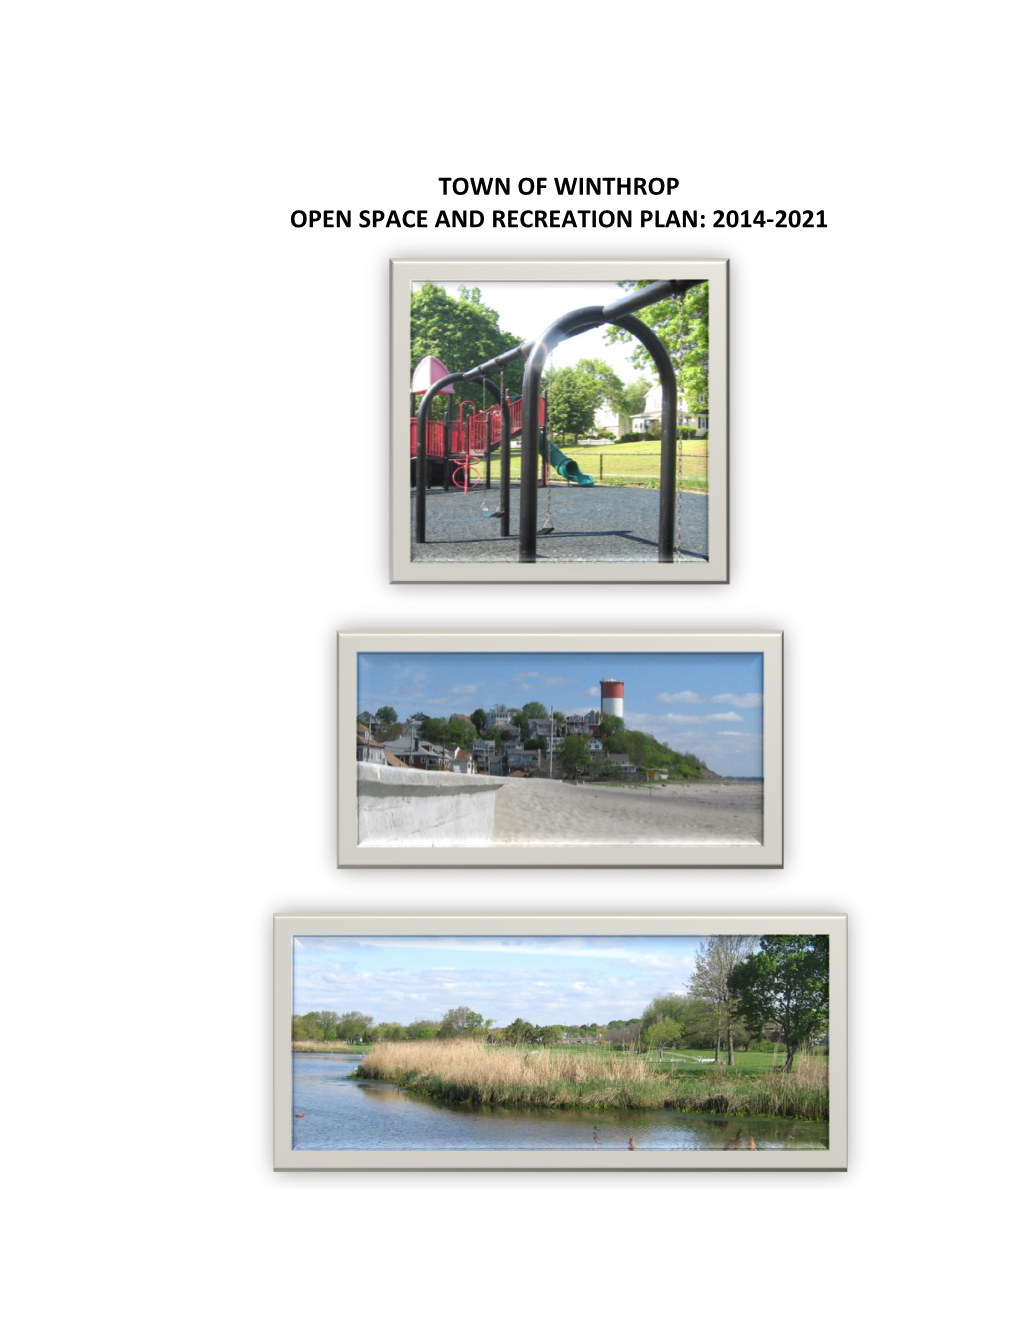 Town of Winthrop Open Space and Recreation Plan: 2014-2021